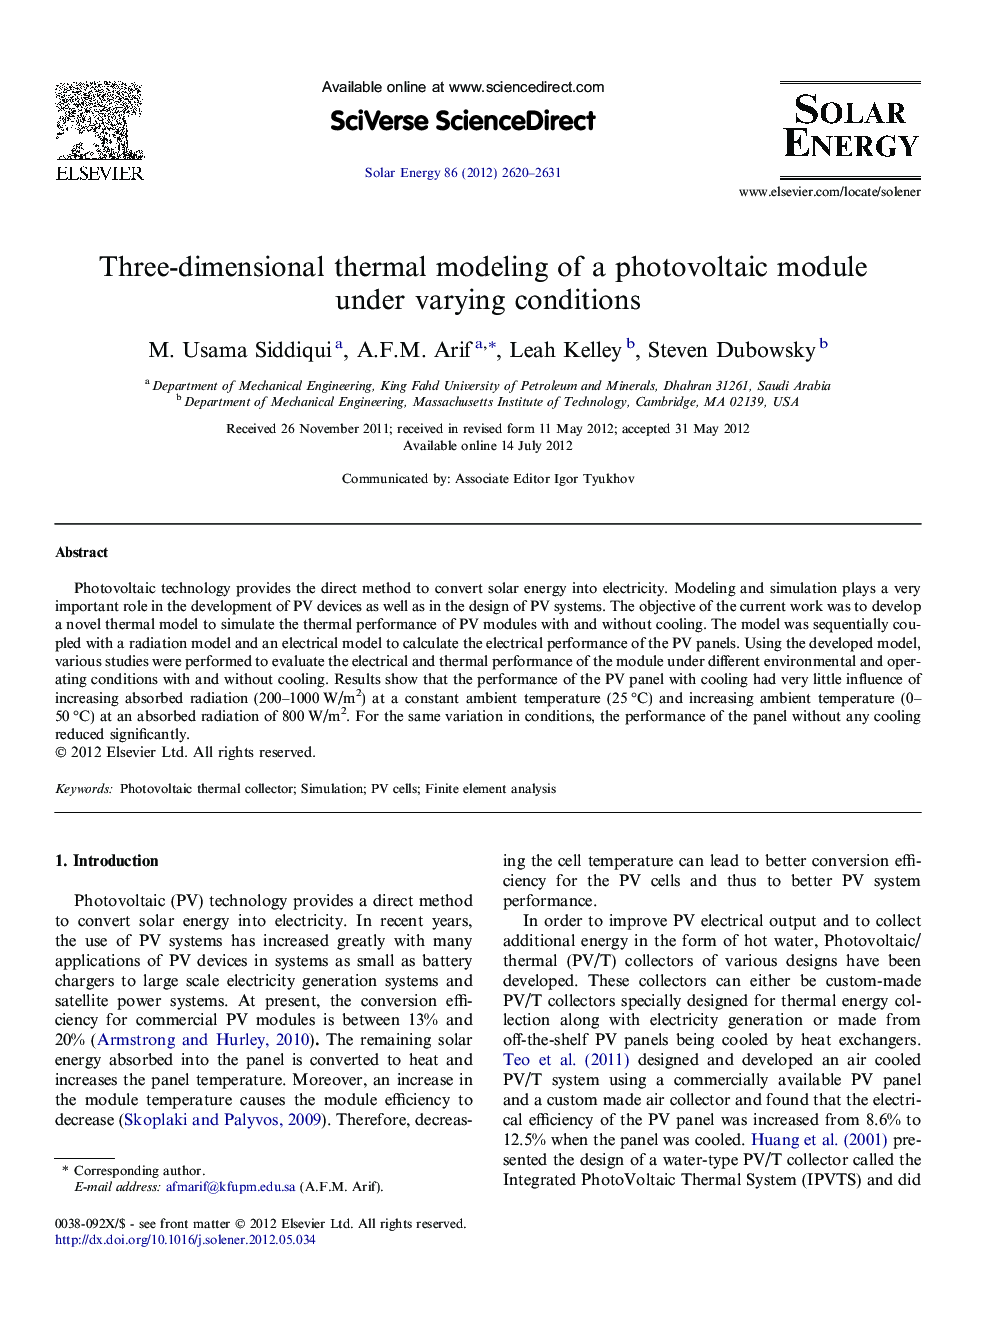 Three-dimensional thermal modeling of a photovoltaic module under varying conditions